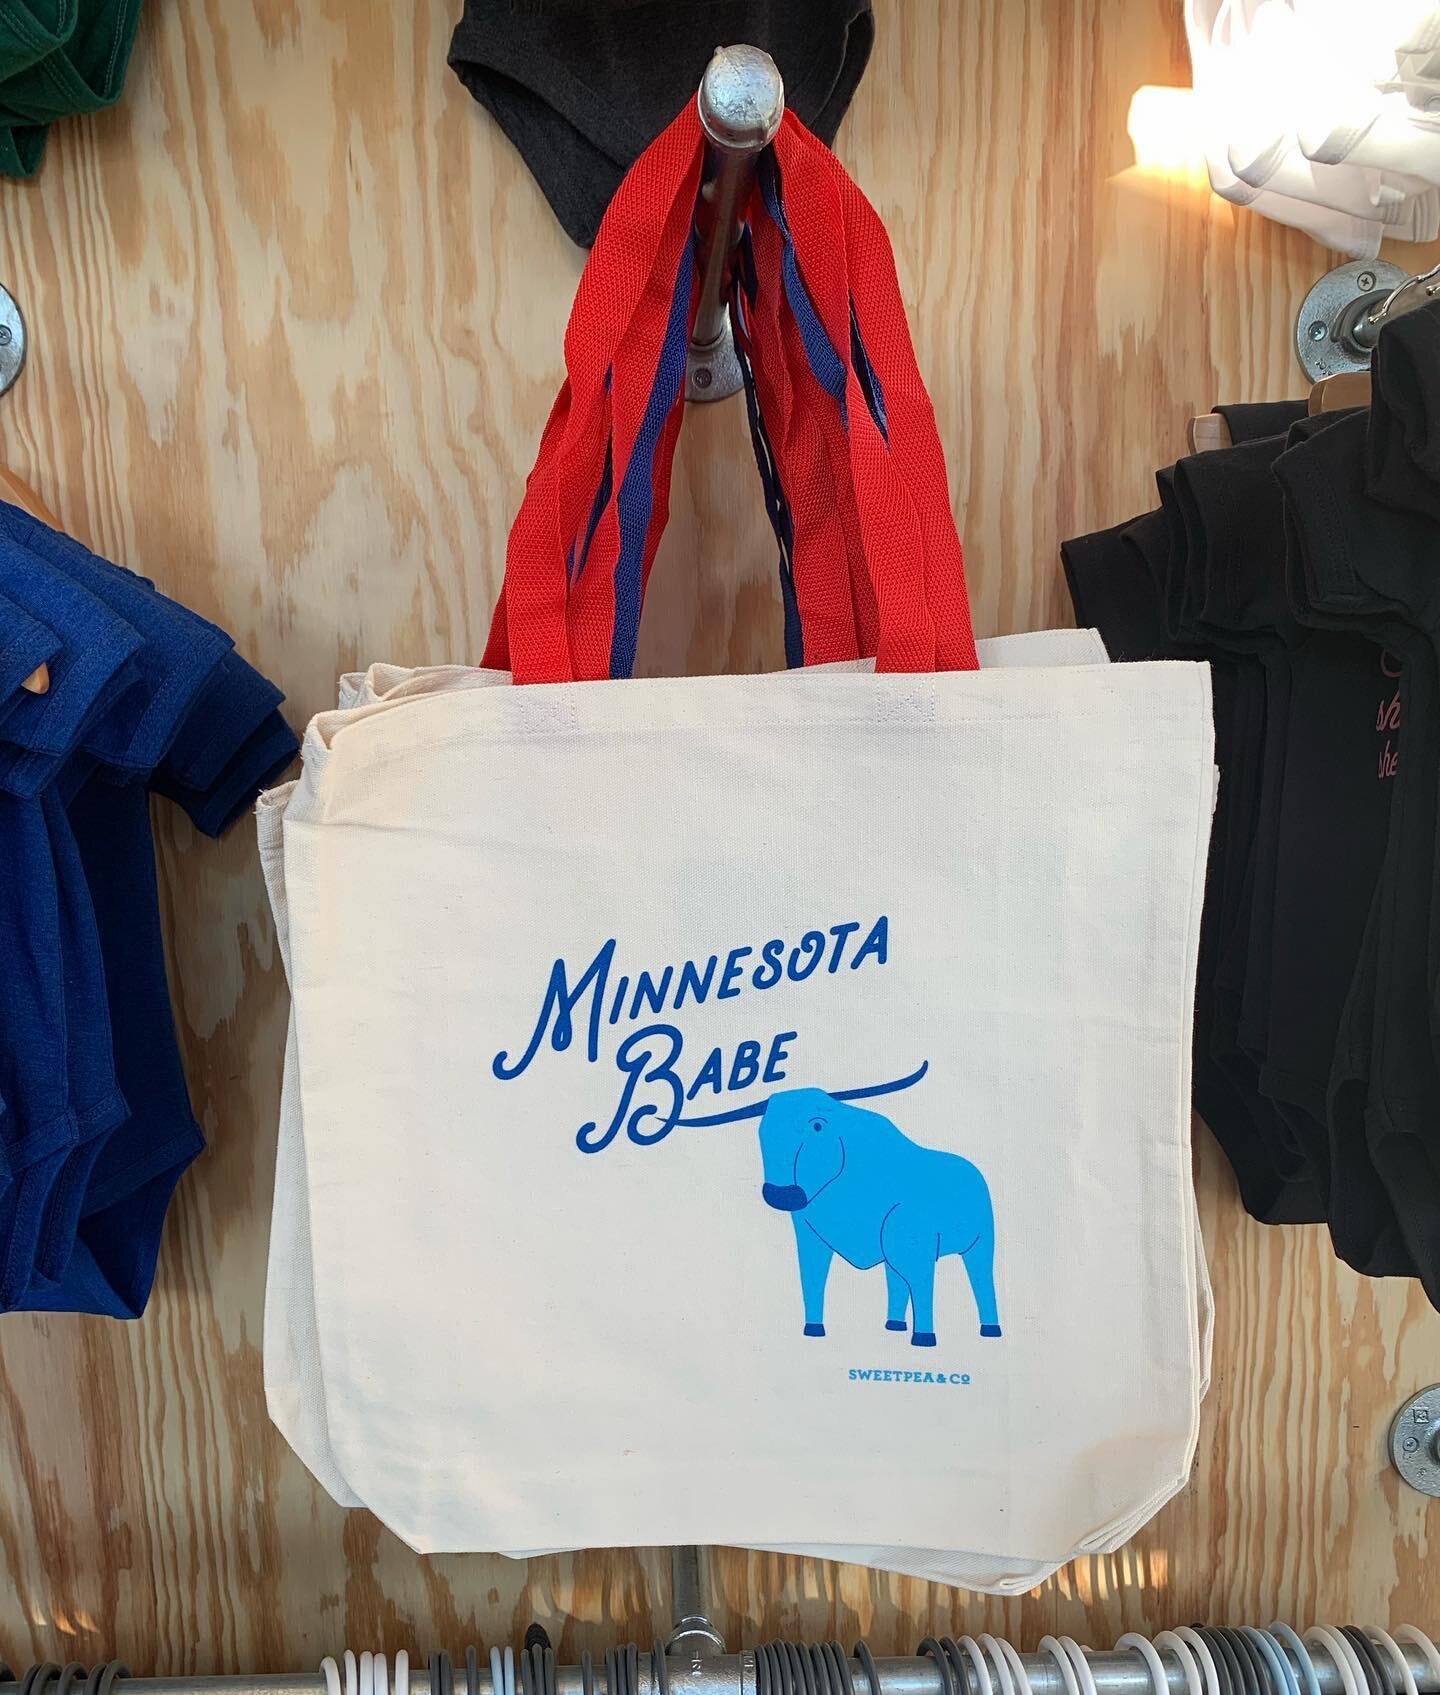 Super cool tote bags we printed for @sweetpeaandco 
Anybody stop by their booth at the @mnstatefair this year?
.
.
.
#sweetpeaandco #sweetpea #totebag #totes #screenprinting #screenprint #print #babetheblueox #babe #jensoncreative #mn #minnesota #min